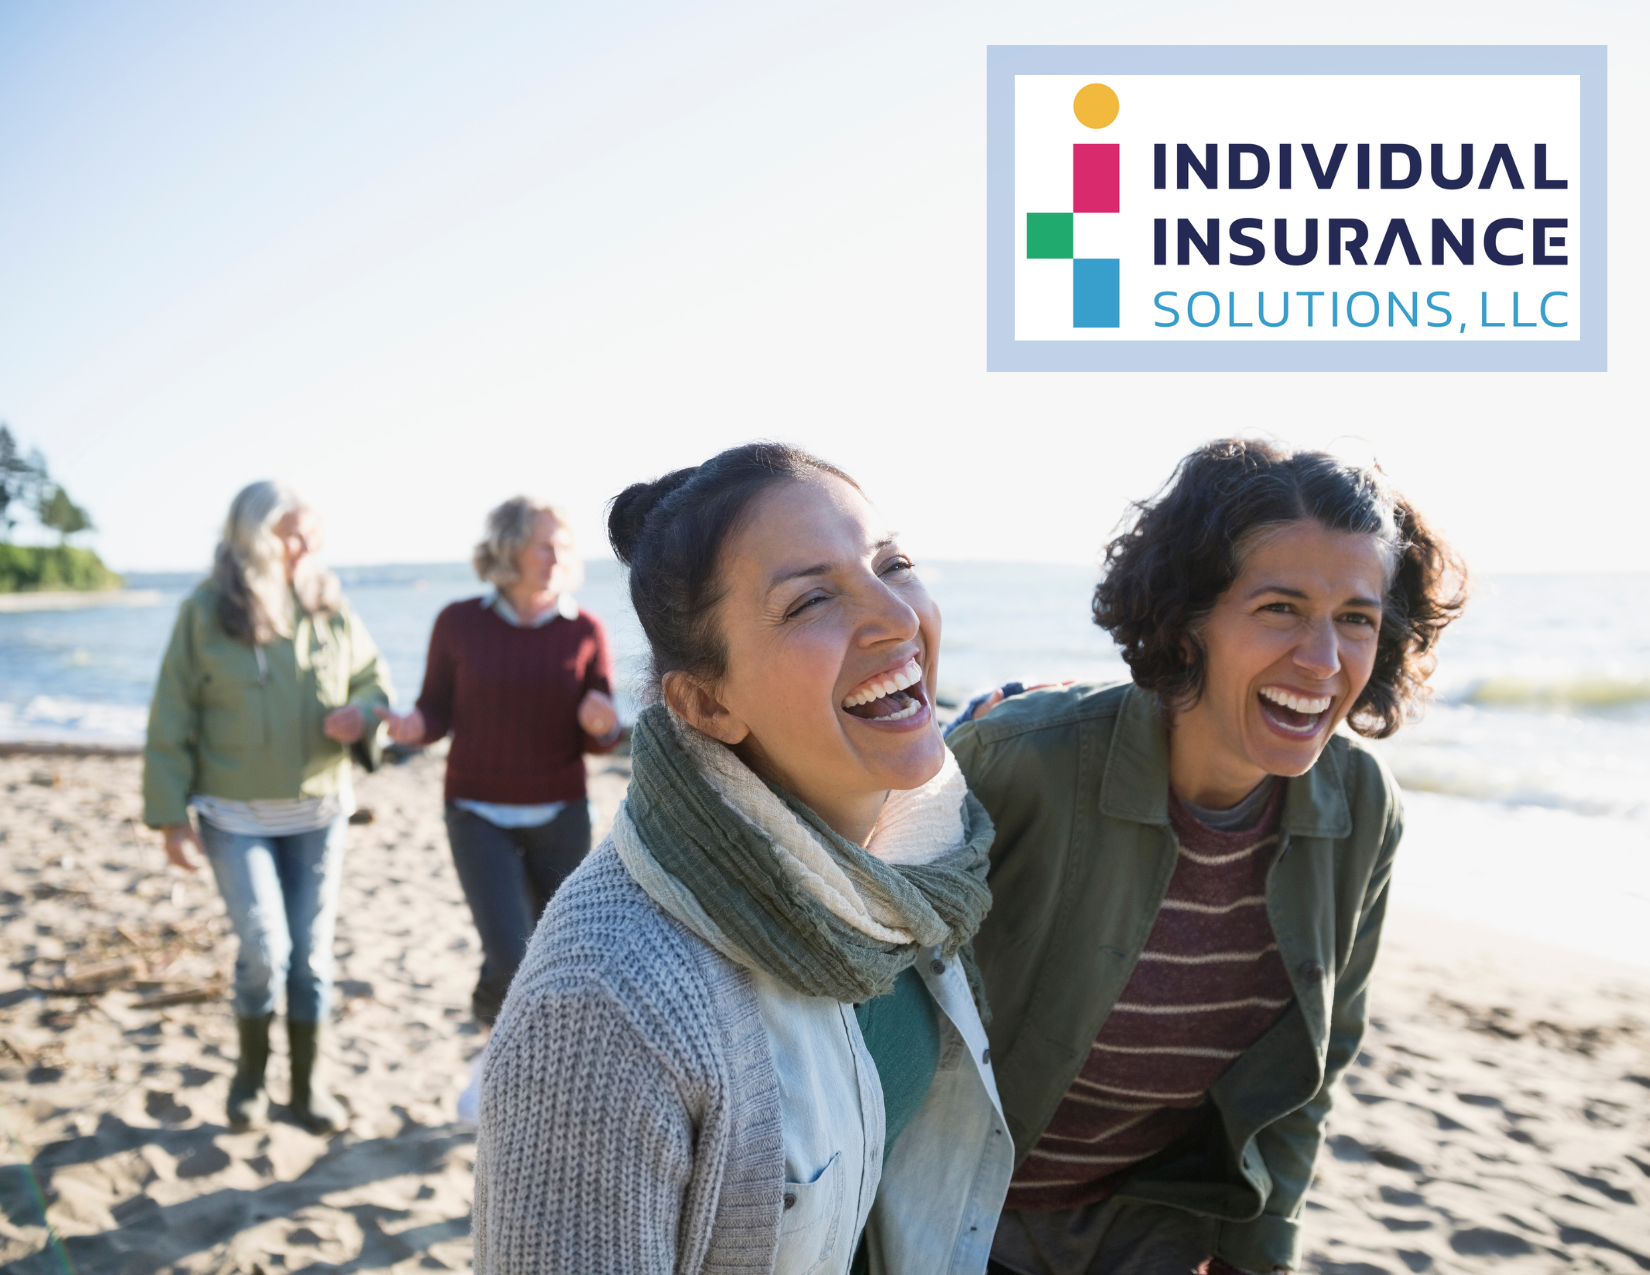 Two women laughing on beach, used as hero image for IIS landing page and has the standard IIS logo in top right corner